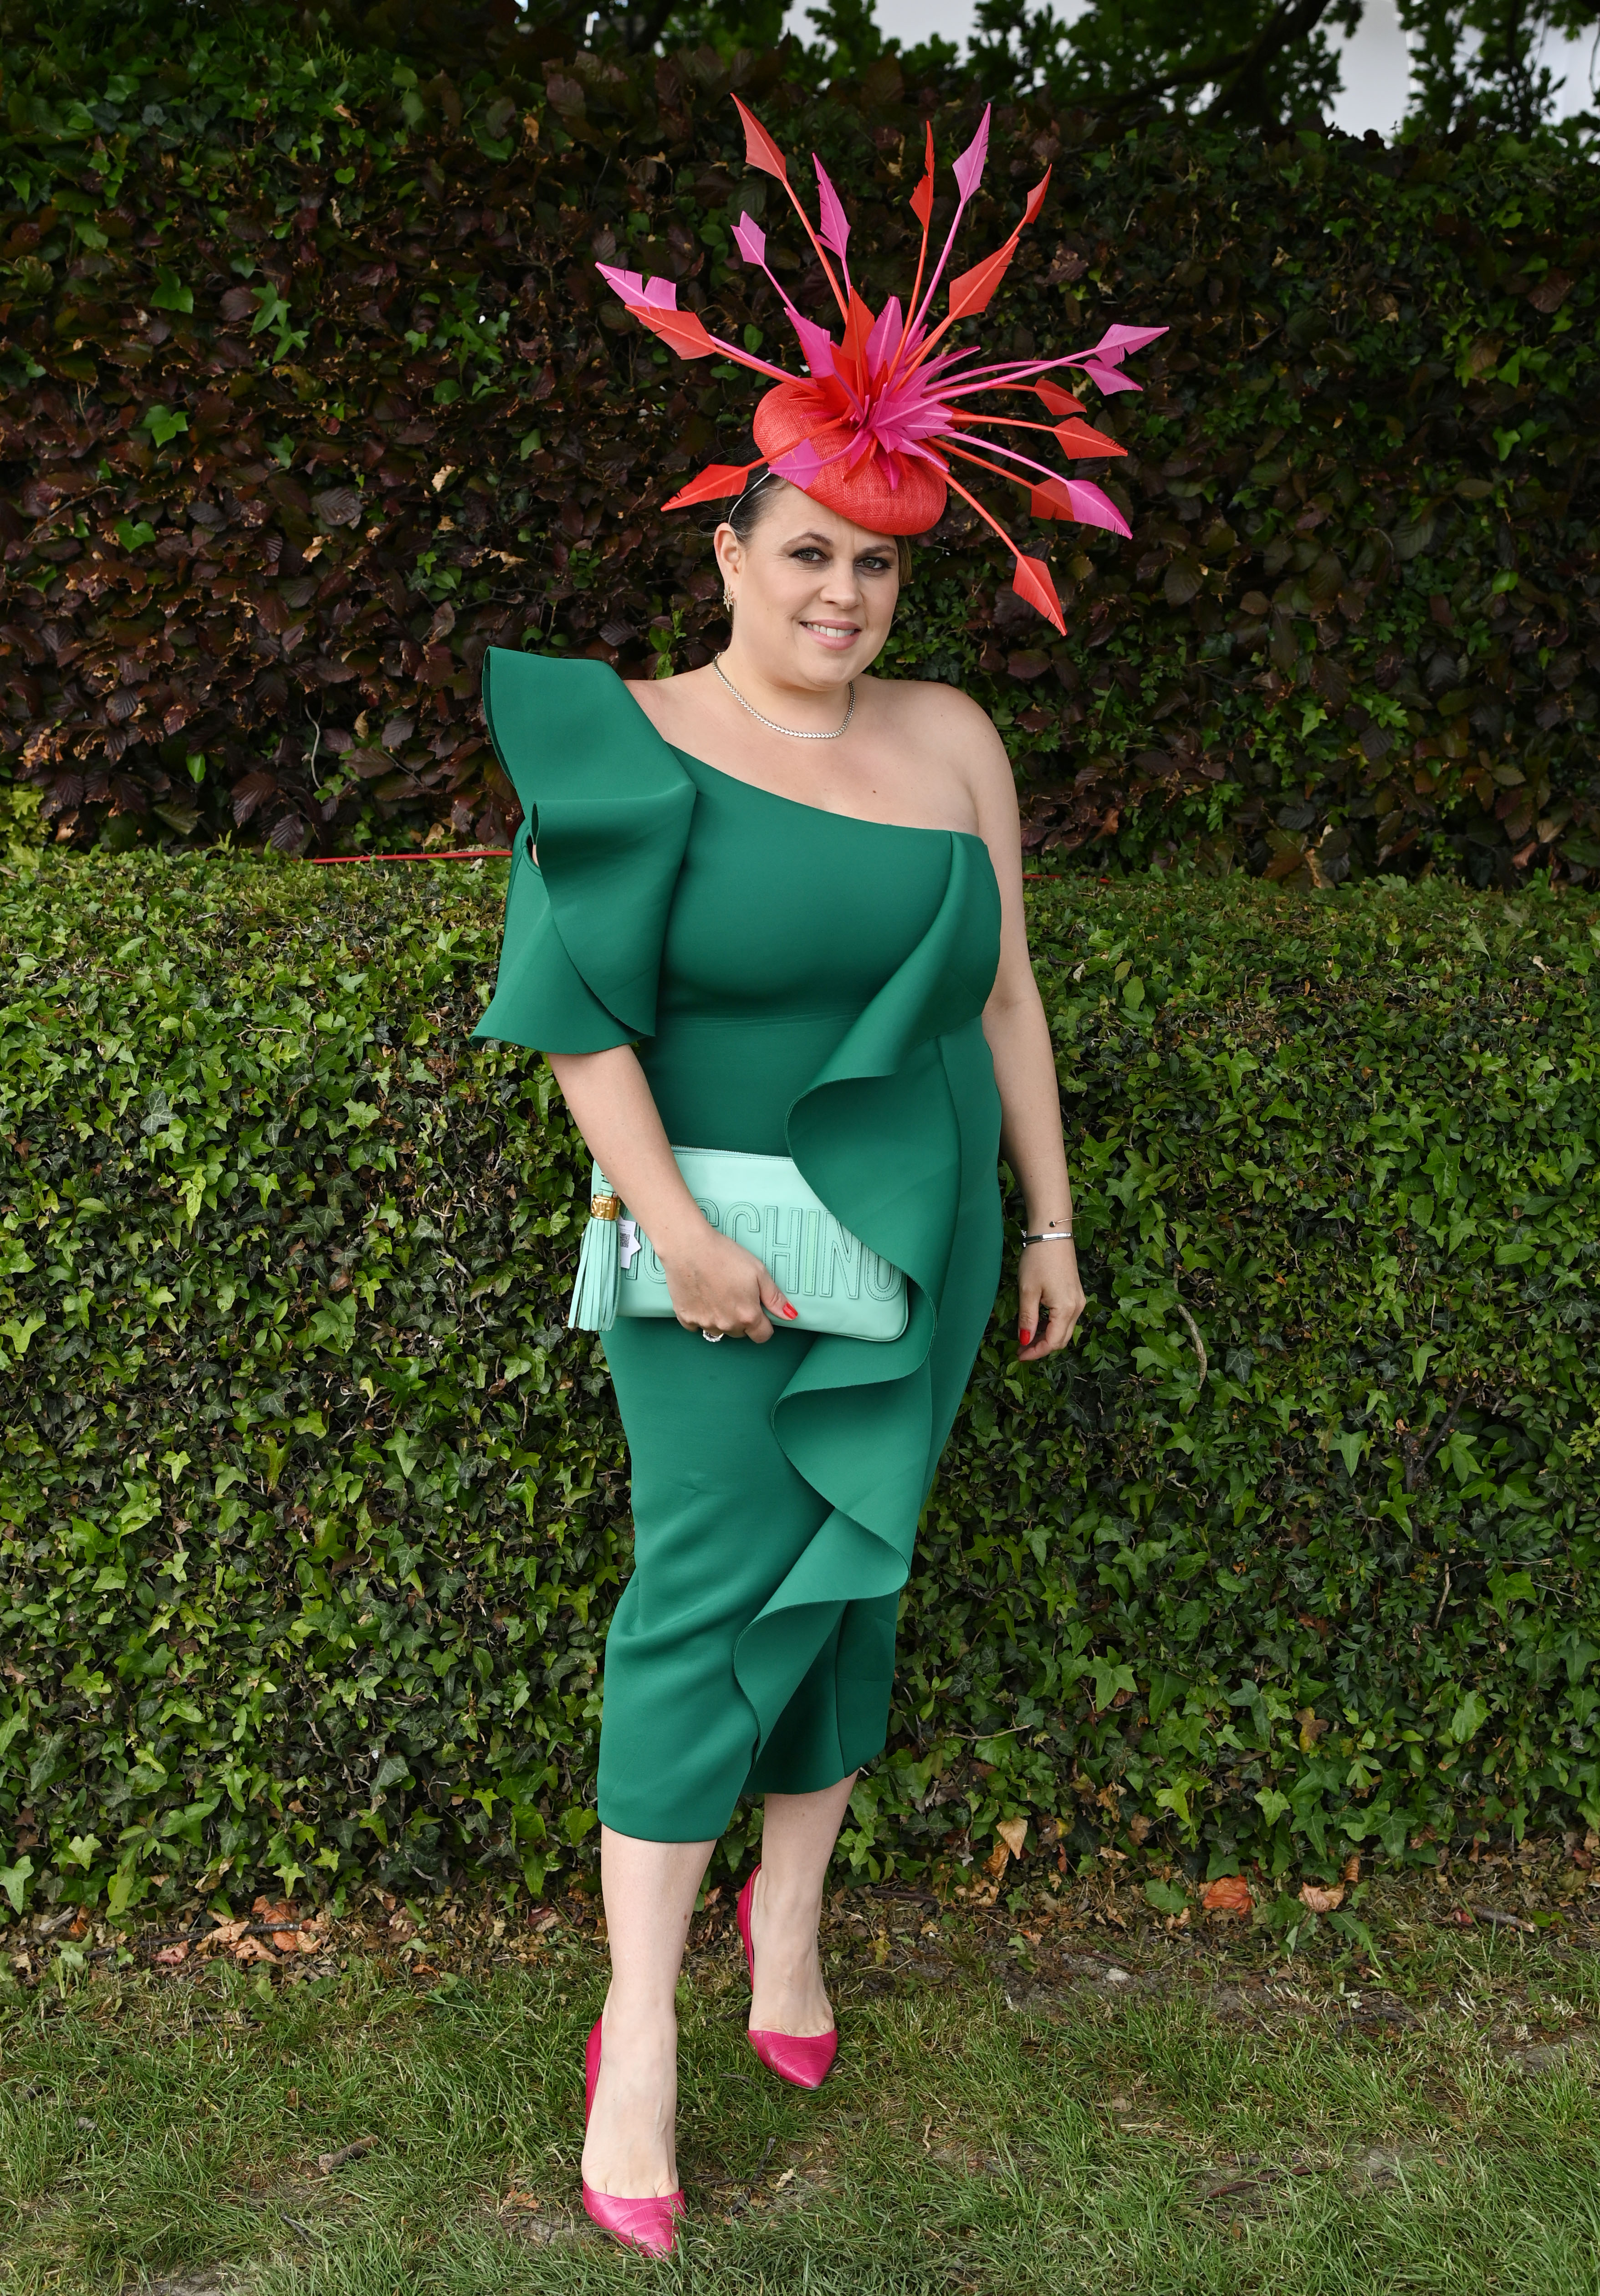 , Stylish racegoers pull out all the stops at Epsom racecourse for Ladies Day with glam dresses and eye-catching hats